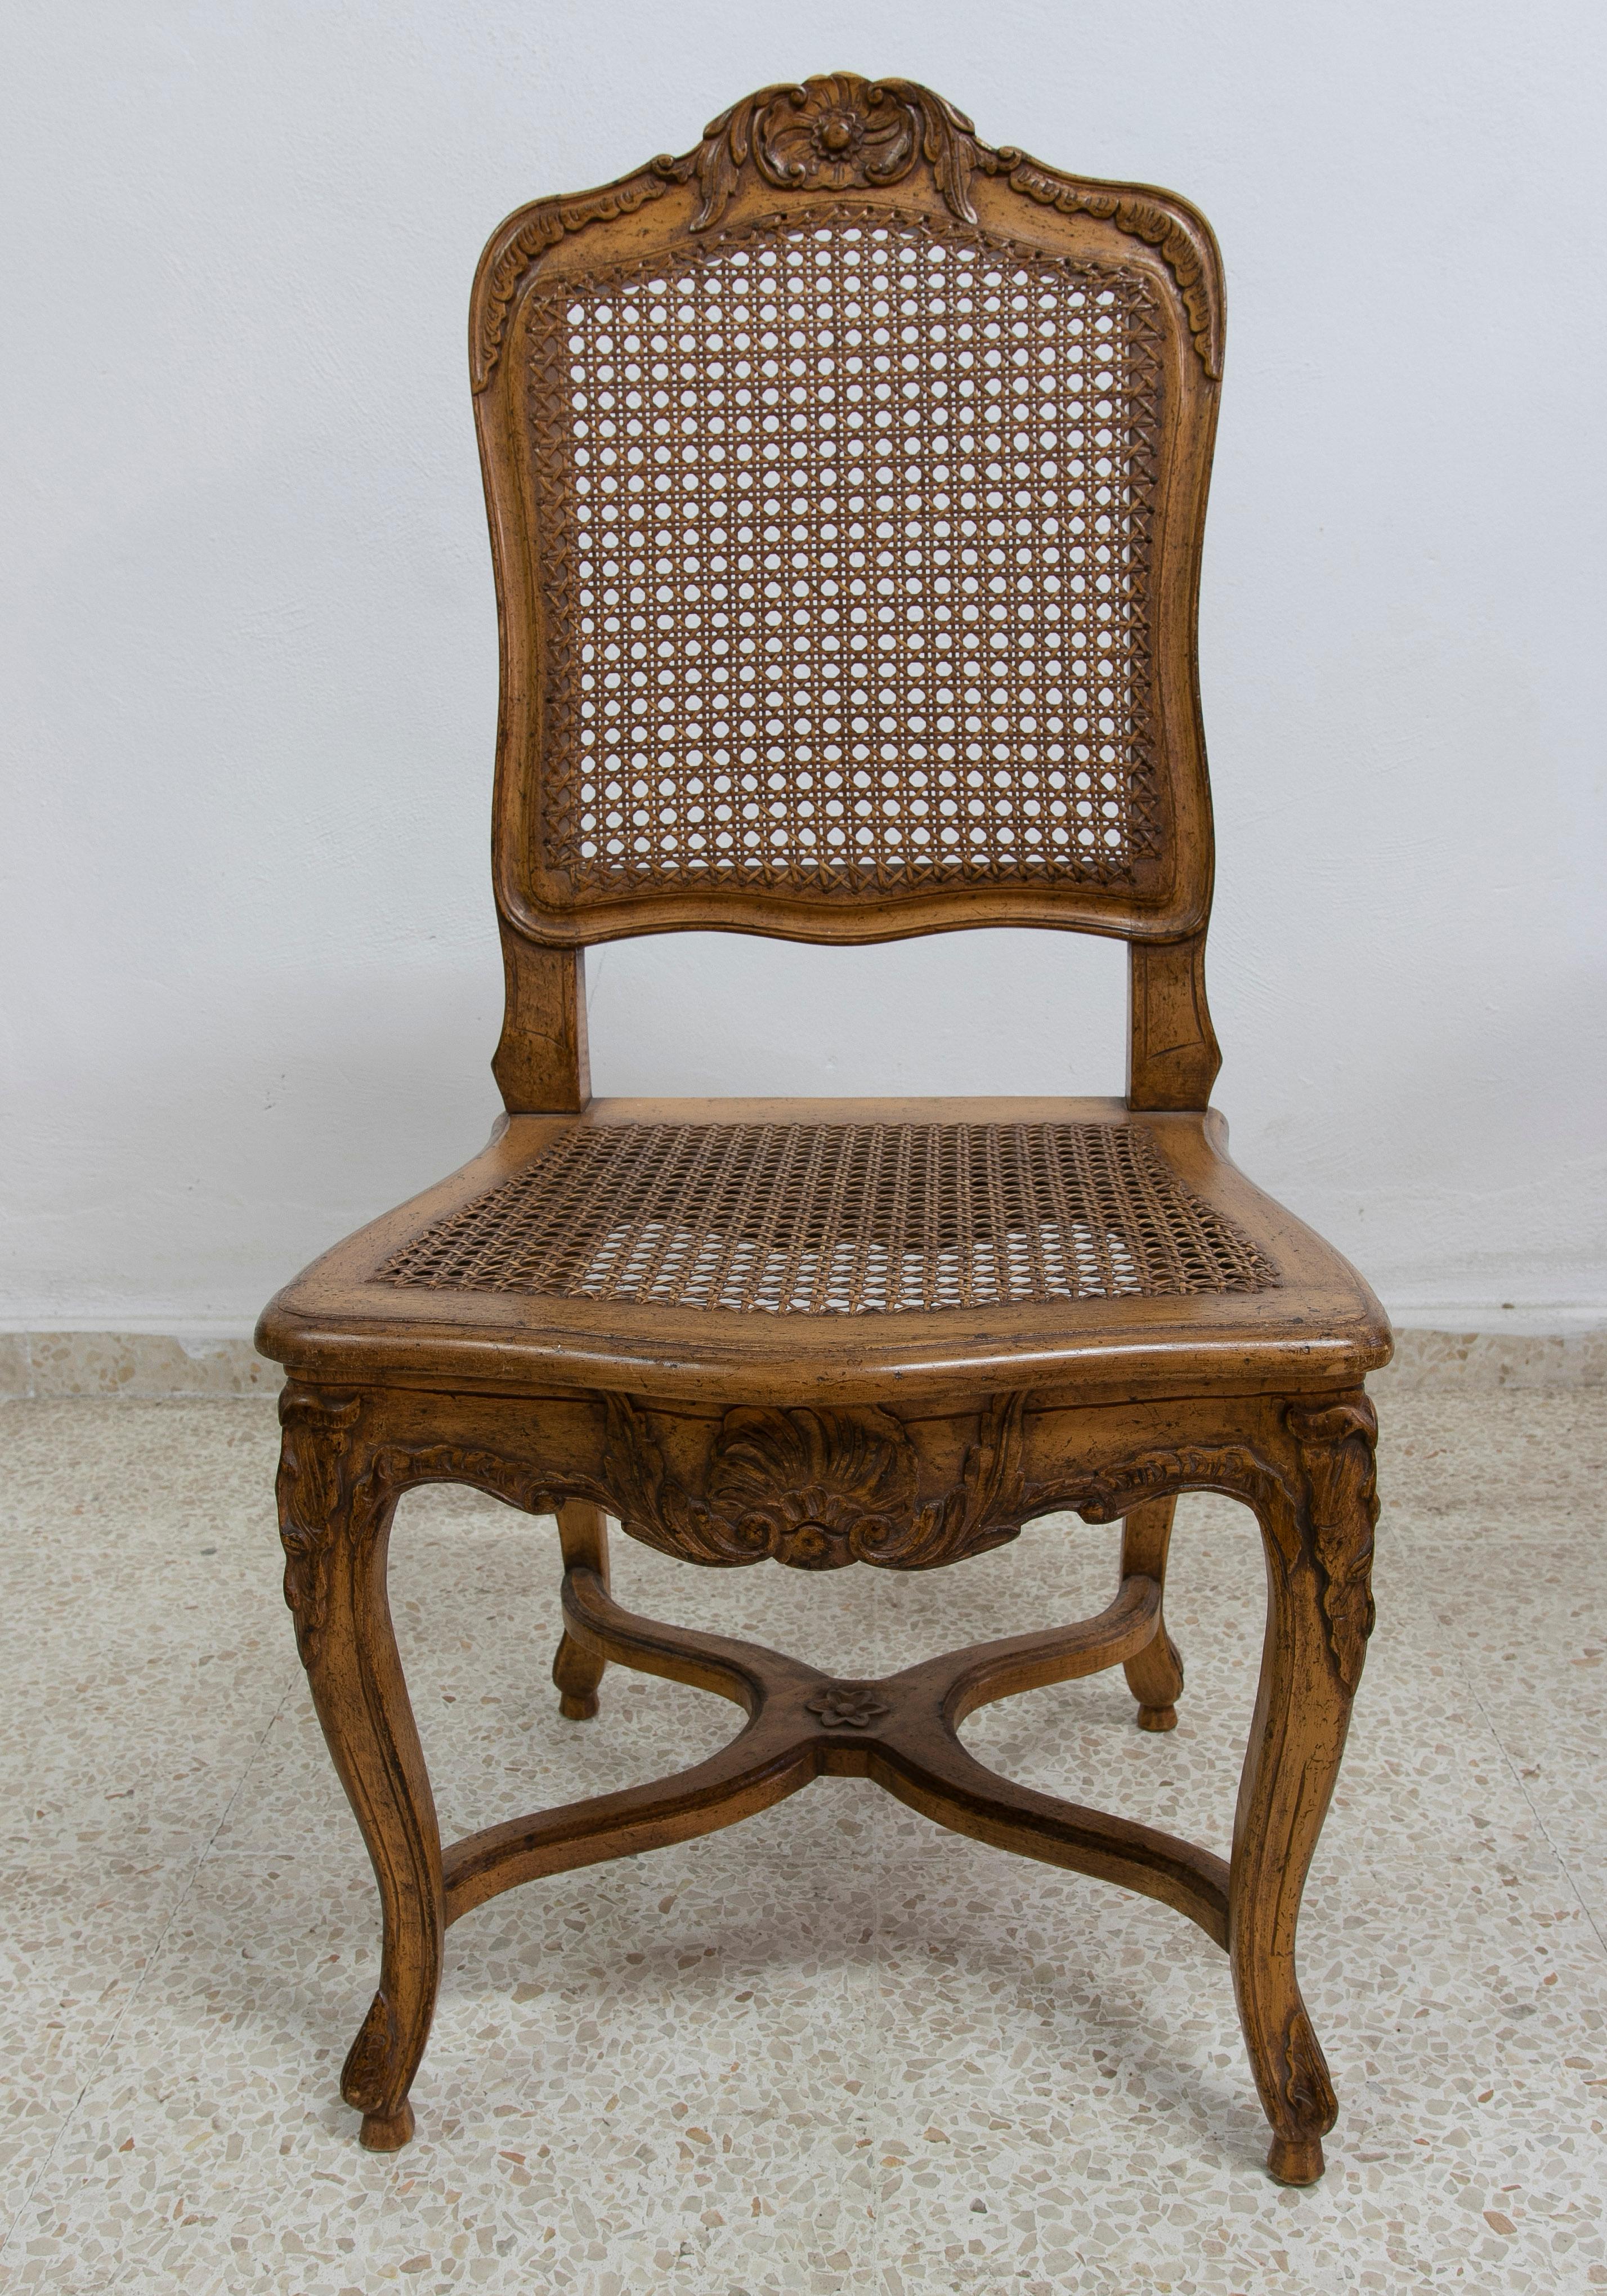 Vintage 1980s Spanish handmade oak wood and woven cane set of French style 8-chairs and 2 armchairs.

Chairs measurements: 100 x 51 x 45cm
Armchairs measurements: 100 x 67 x 50cm.